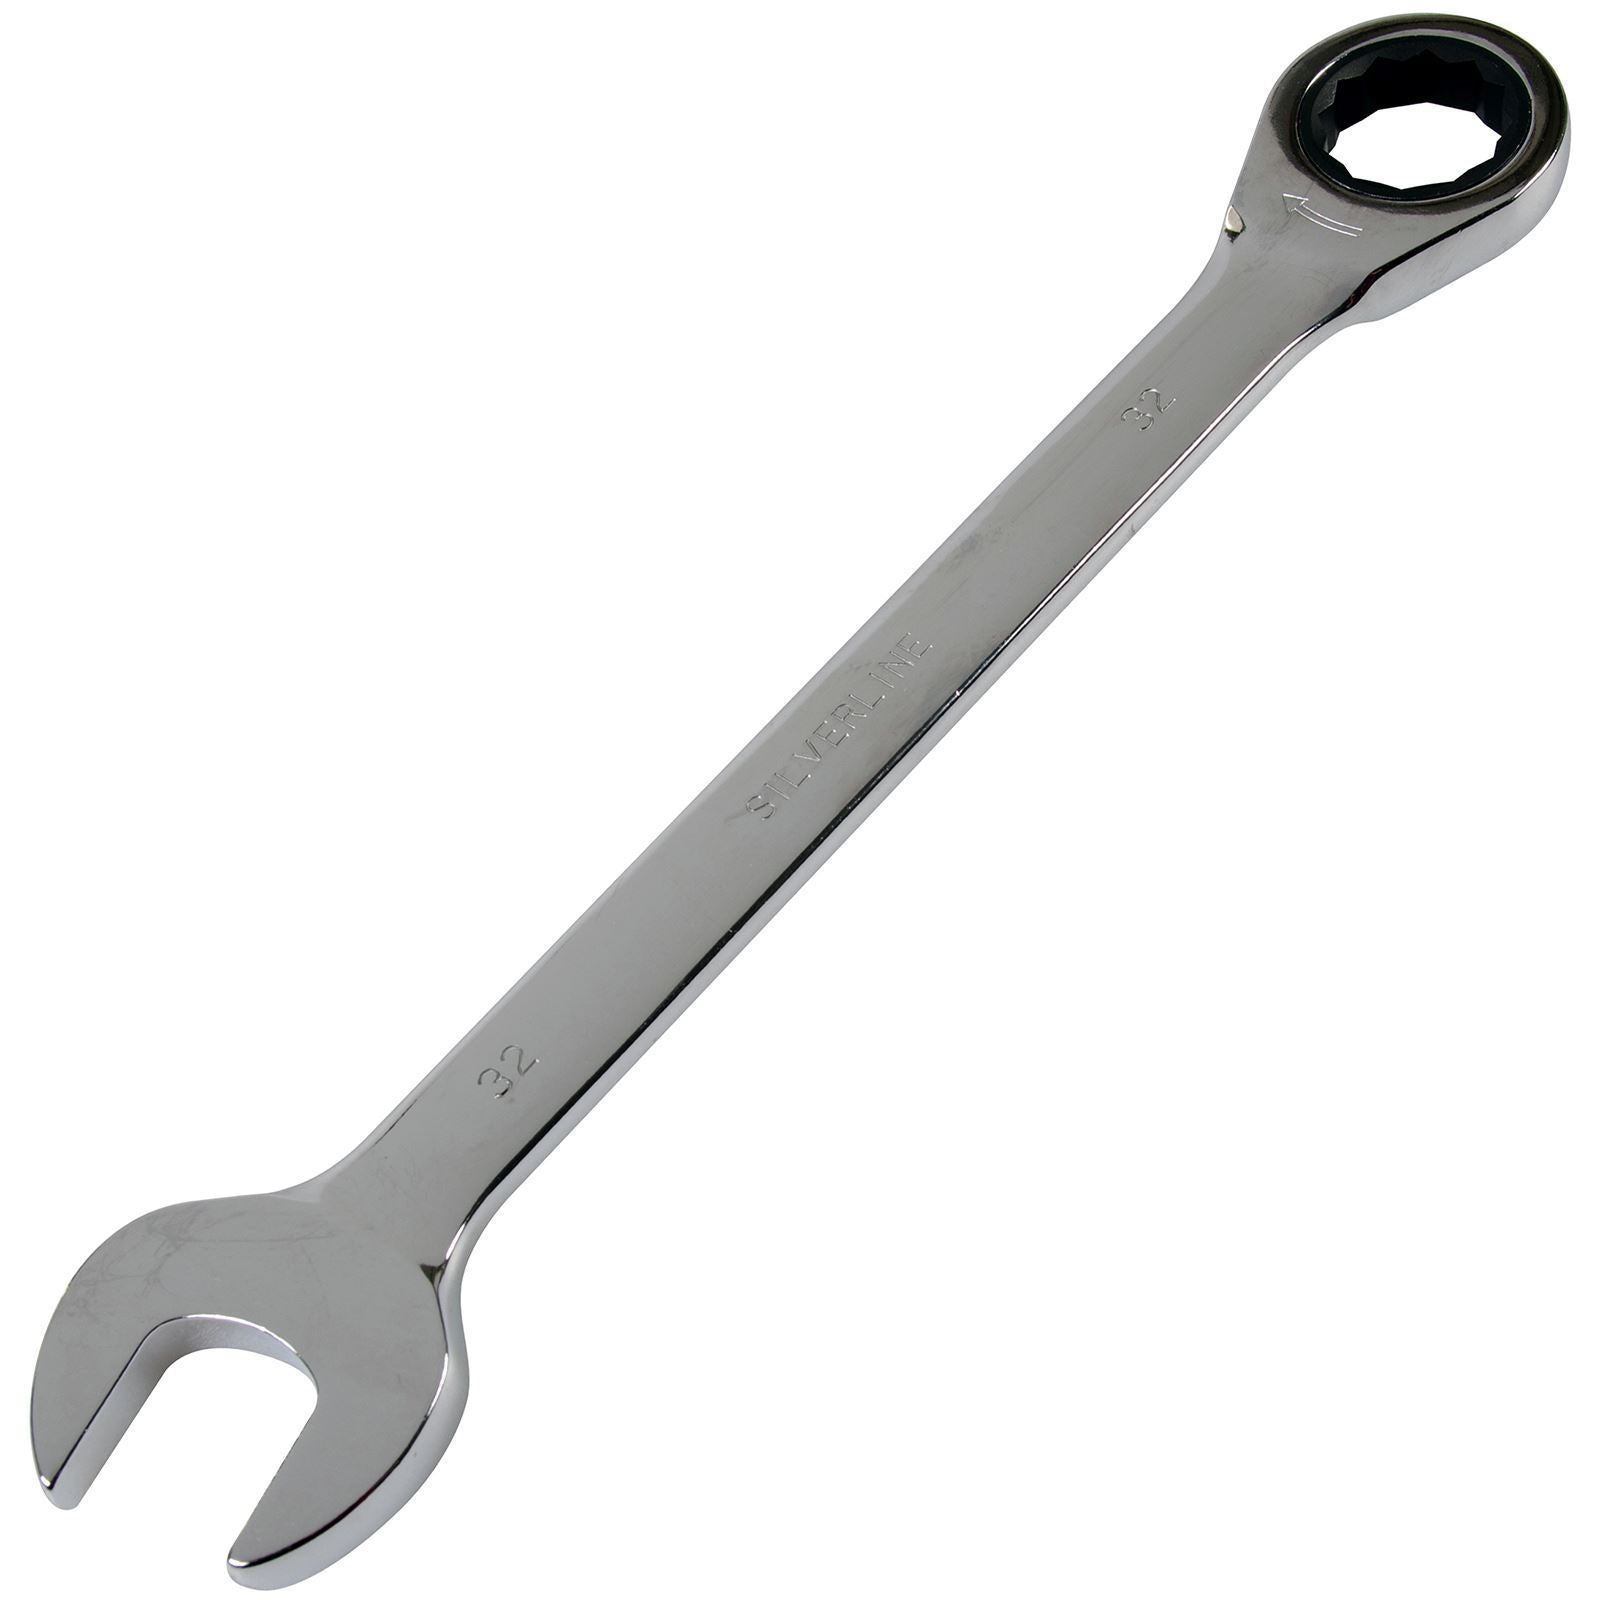 Silverline Fixed Head Ratchet Spanners